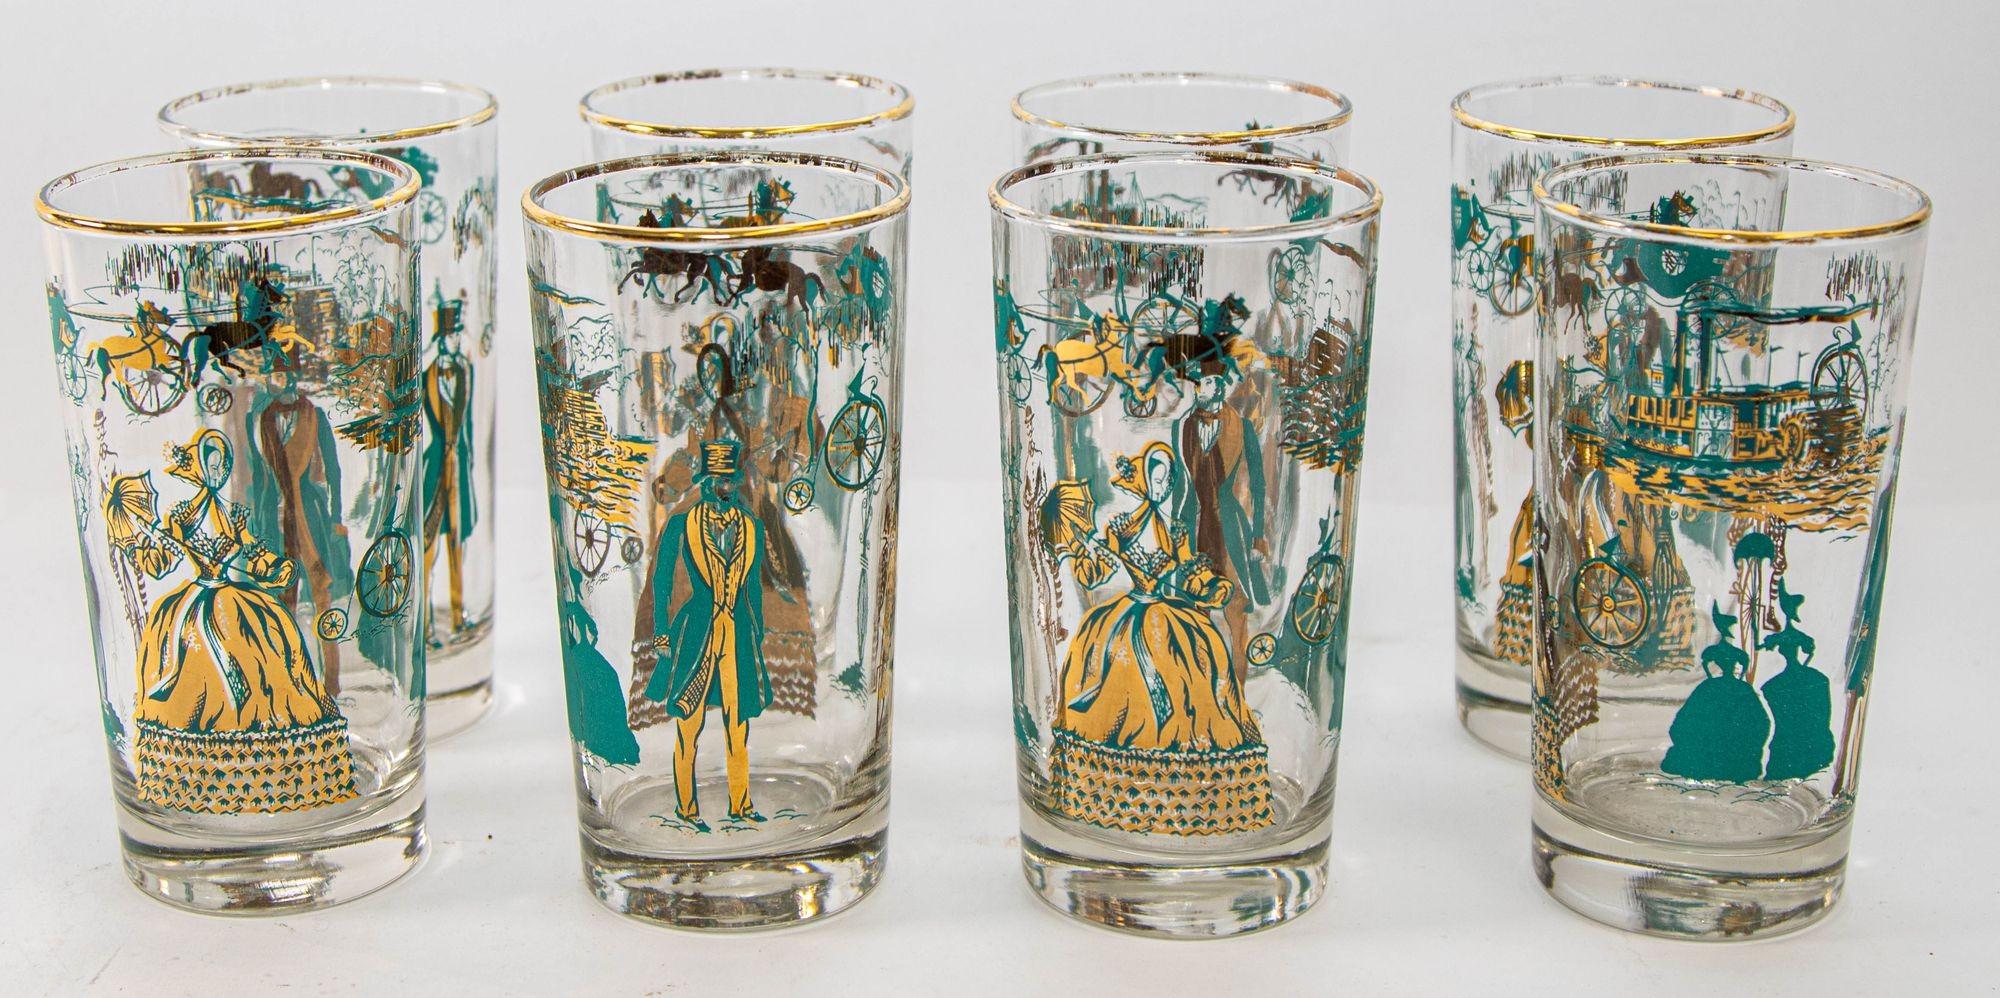 Elegant exquisite vintage set of eight turquoise and gold highball cocktail glasses.
circa 1960s glasses depicting rich gentleman and ladies figures wearing Renaissance Victorian Dress, horse carriage and other period design.
Set of 8 collectible